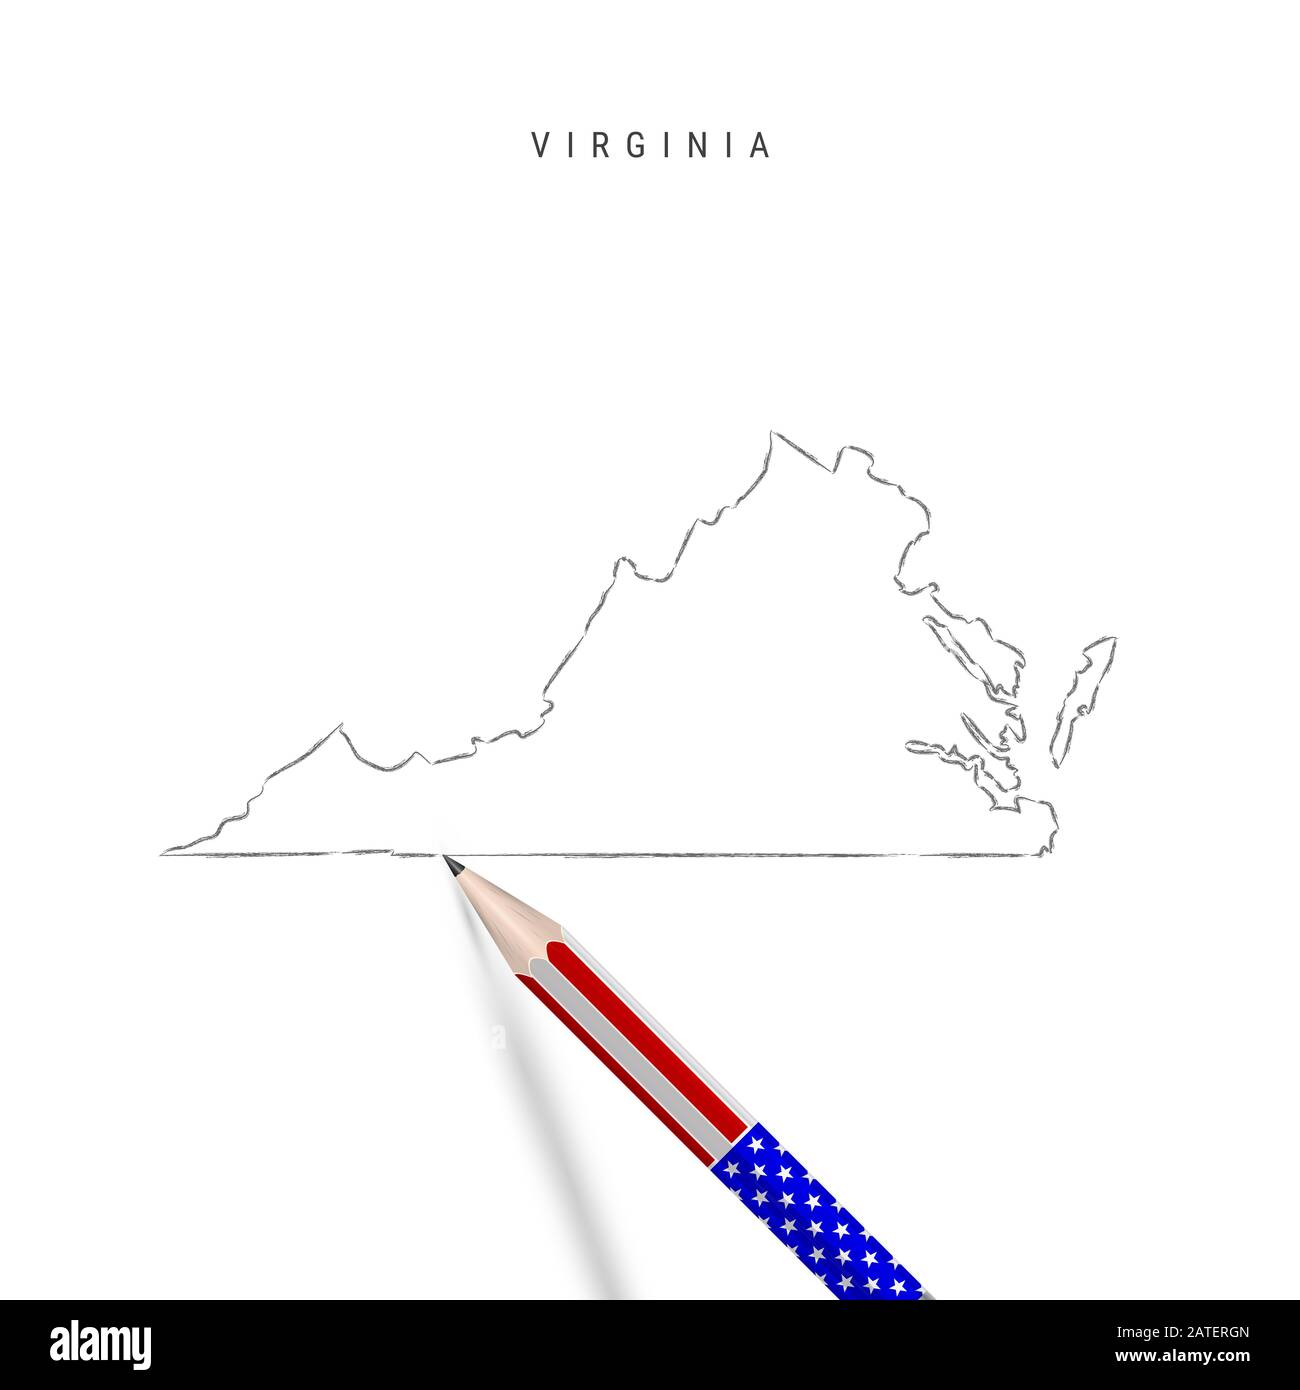 Virginia US state map pencil sketch. Virginia outline contour map with